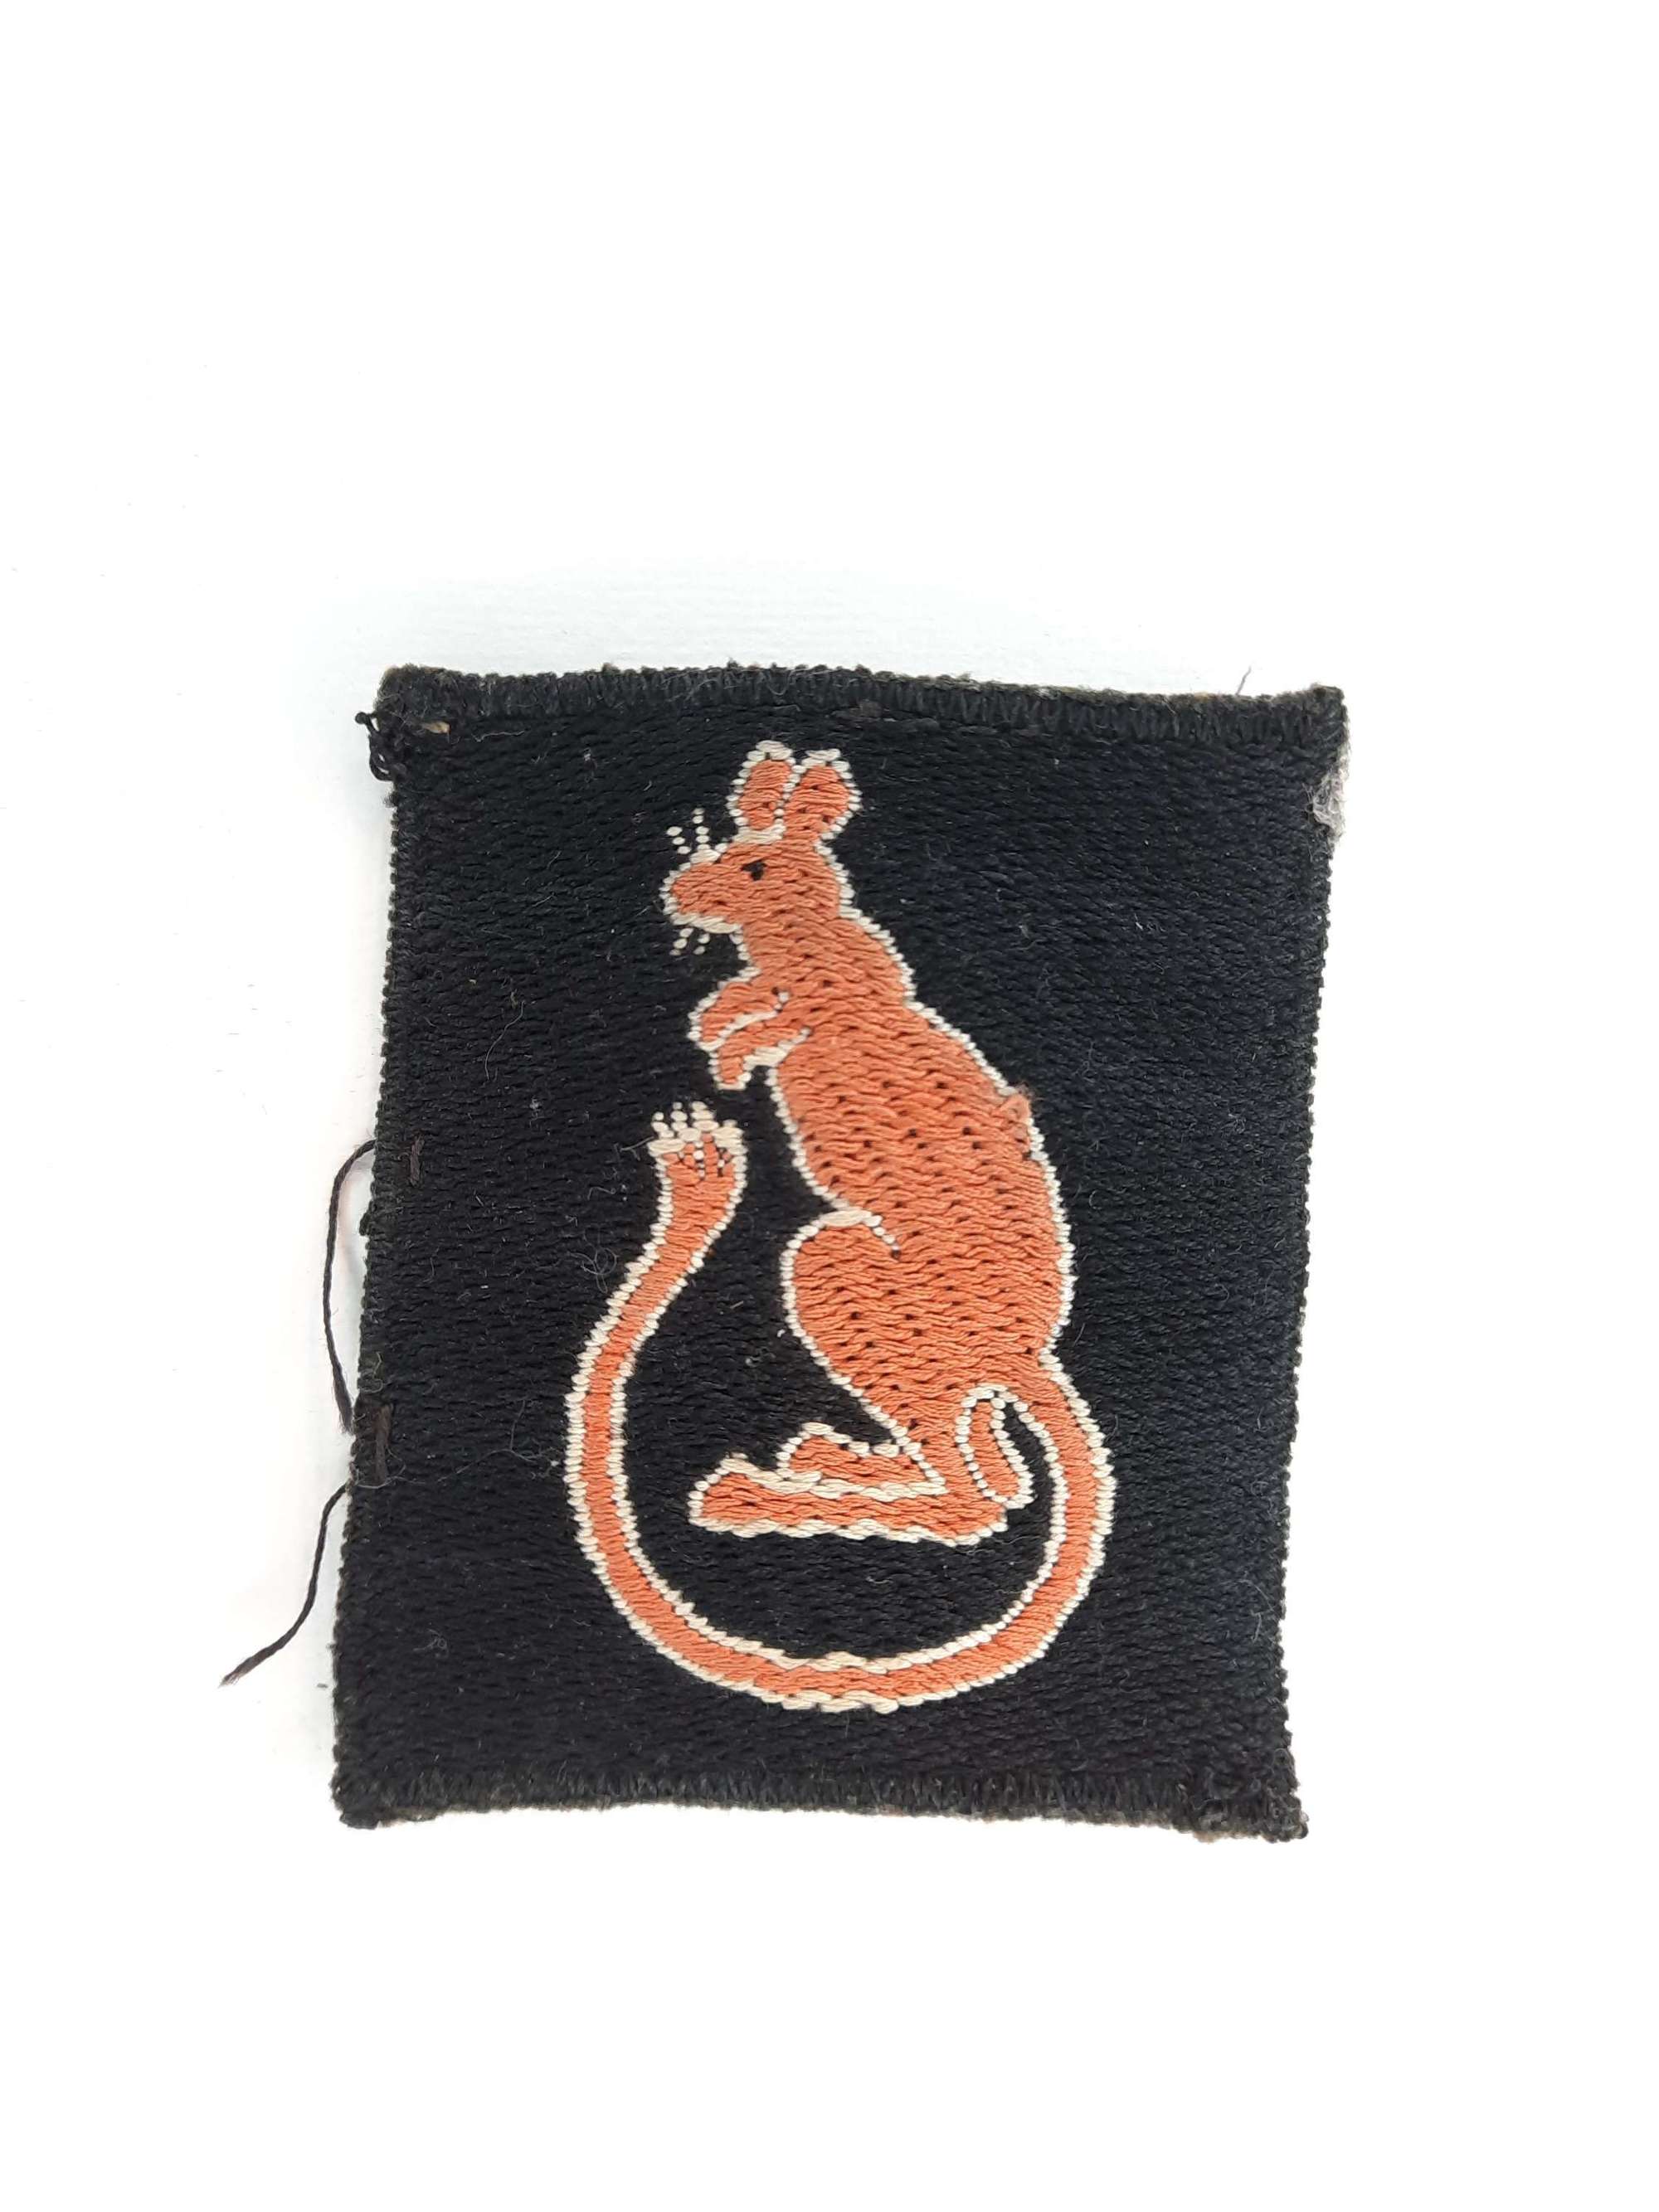 7th Armoured Division Formation Sign Patch